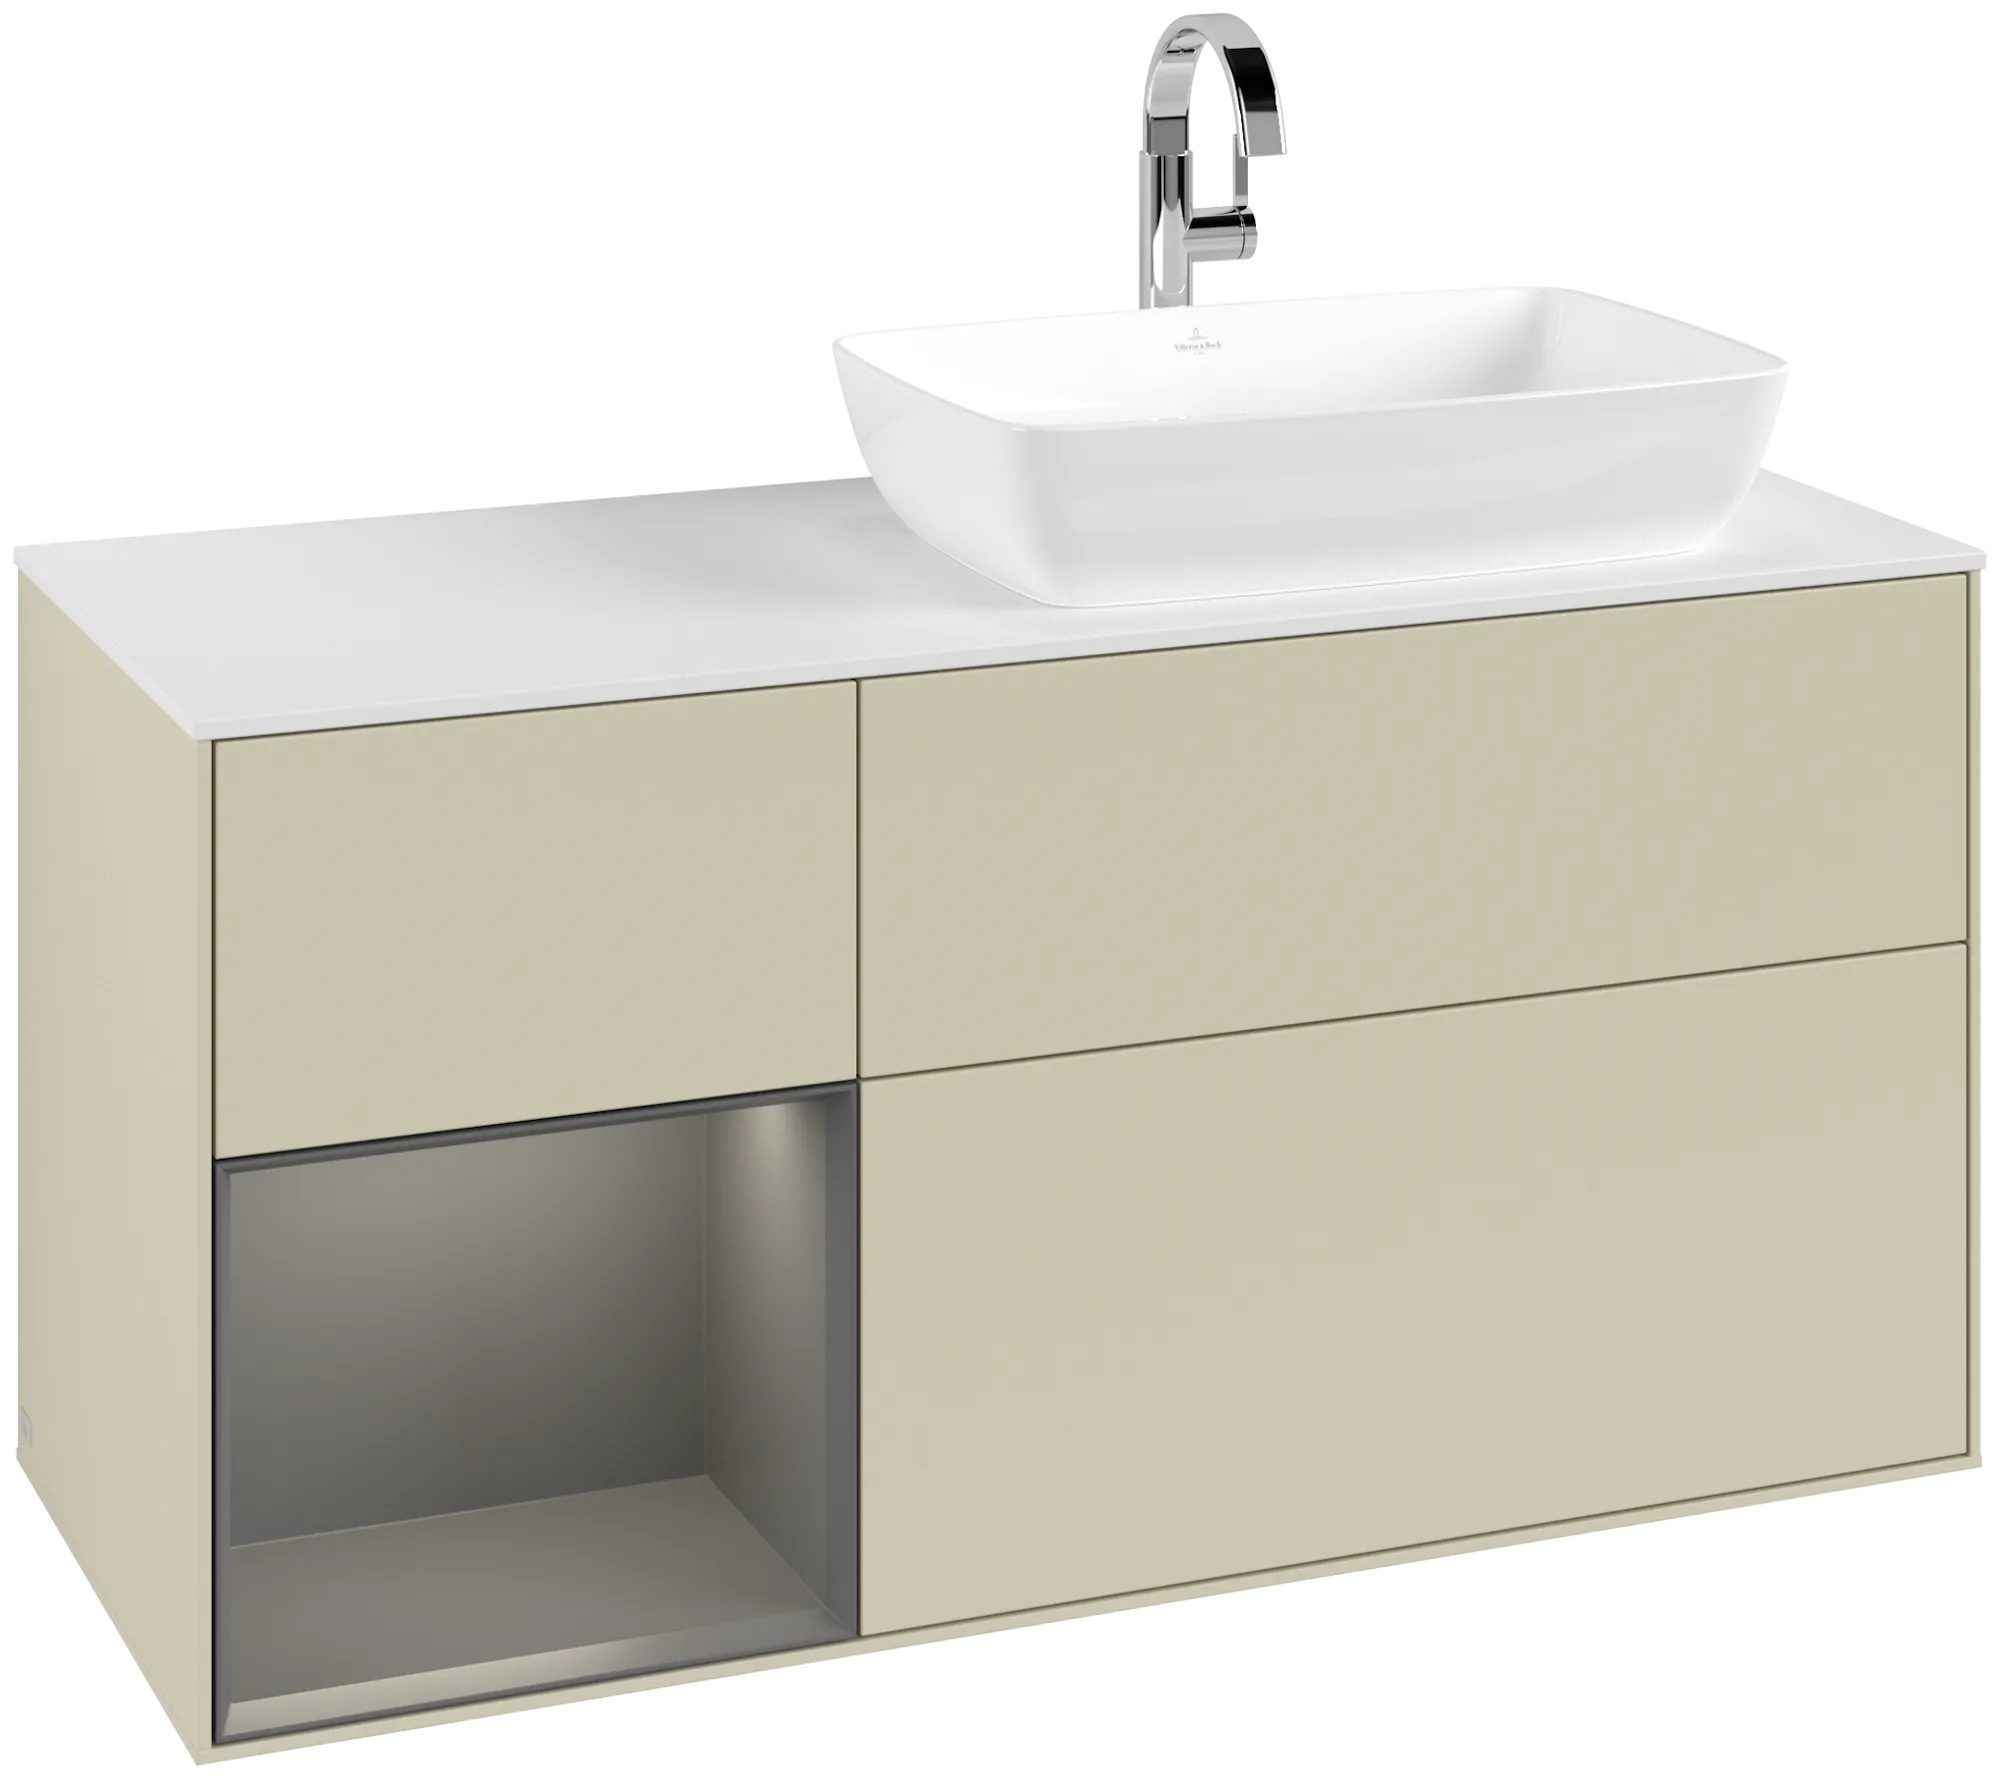 VILLEROY BOCH Finion Vanity unit, with lighting, 3 pull-out compartments, 1200 x 603 x 501 mm, Silk Grey Matt Lacquer / Anthracite Matt Lacquer / Glass White Matt #G801GKHJ resmi